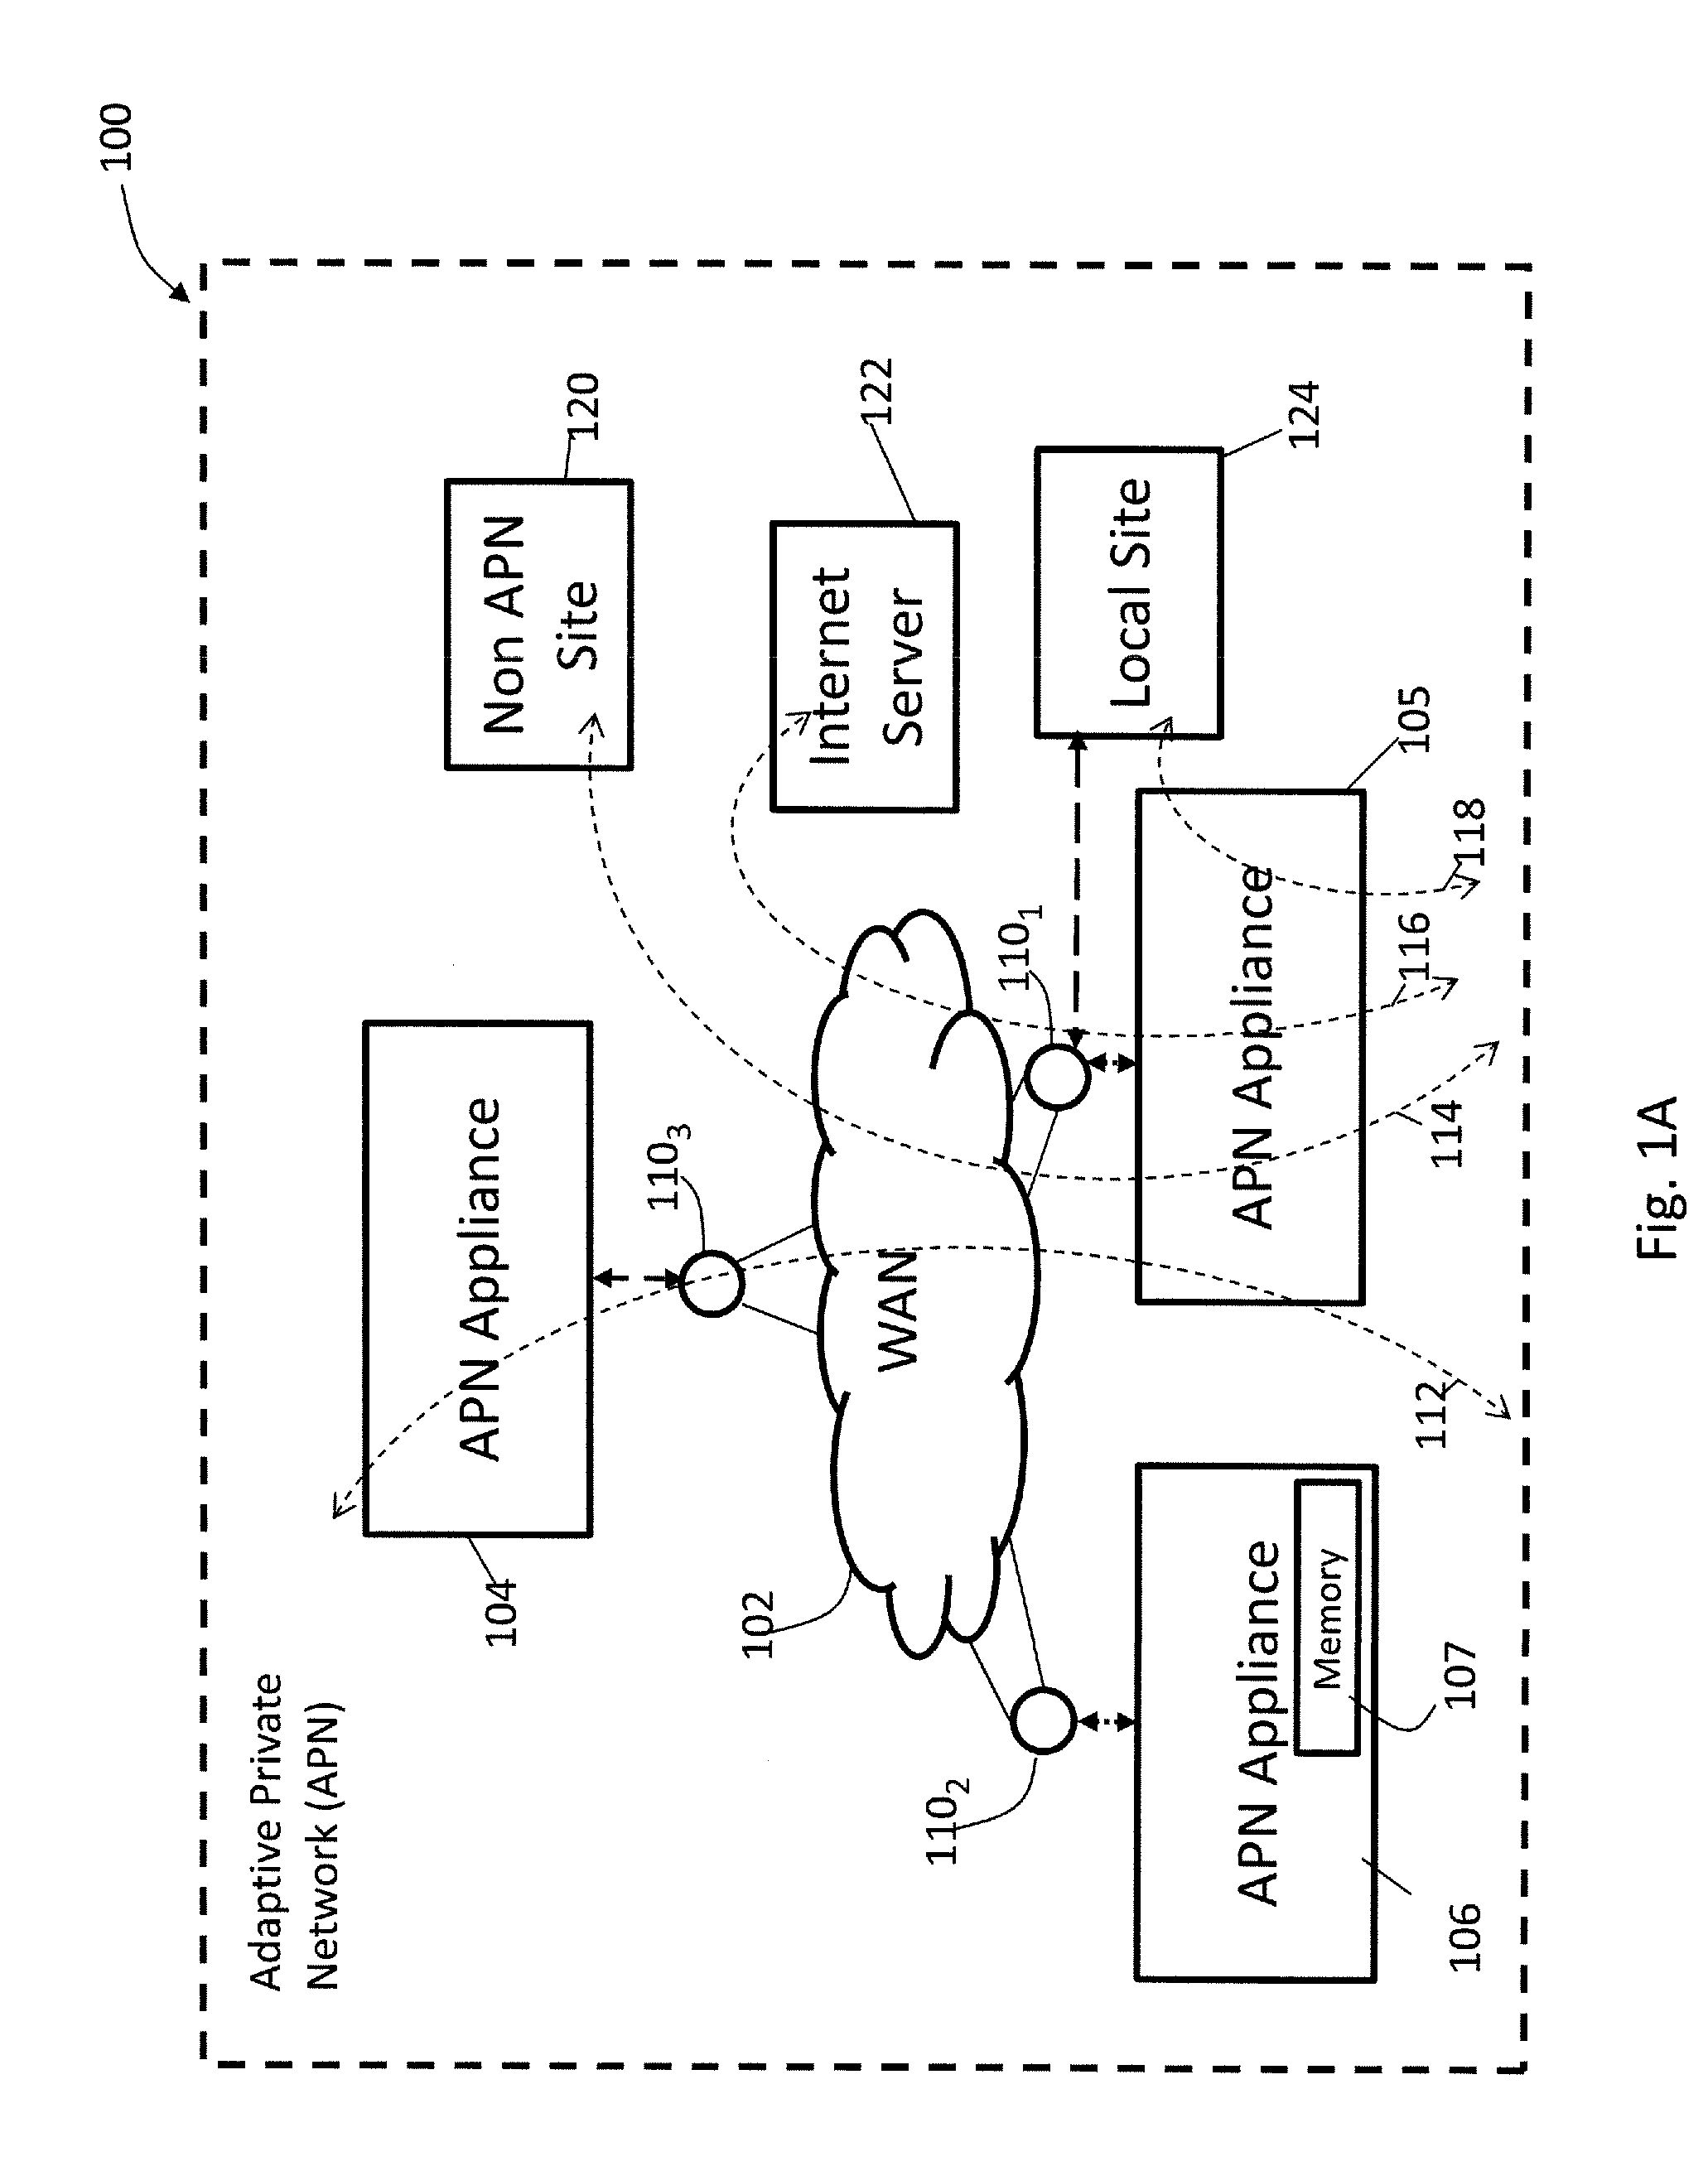 Methods and Apparatus for Providing Adaptive Private Network Centralized Management System Discovery Processes